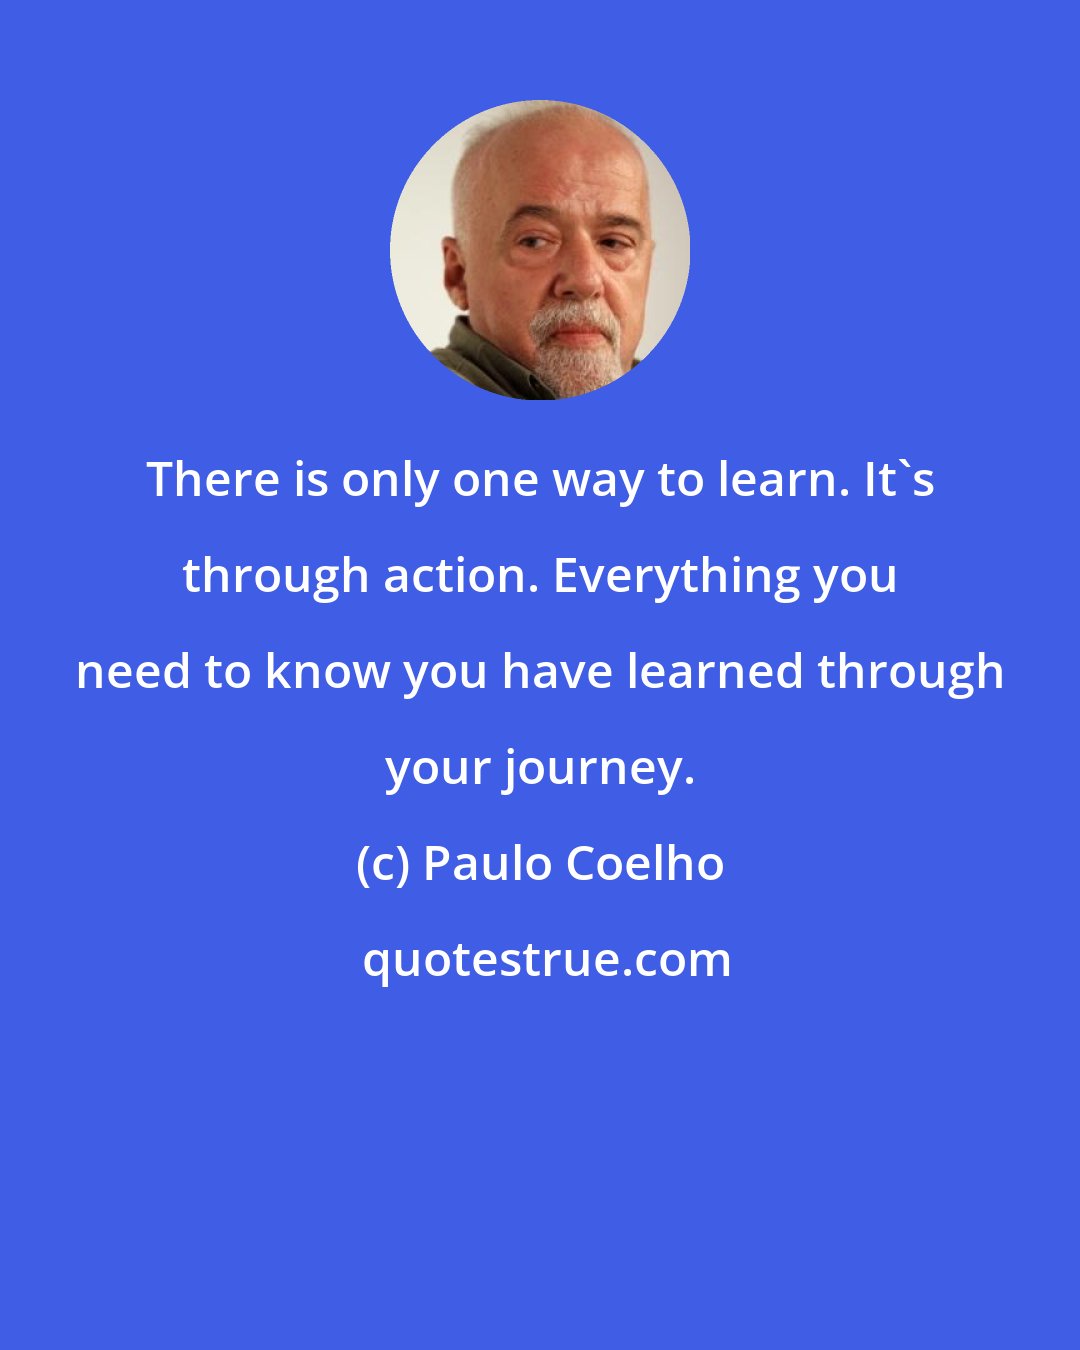 Paulo Coelho: There is only one way to learn. It's through action. Everything you need to know you have learned through your journey.